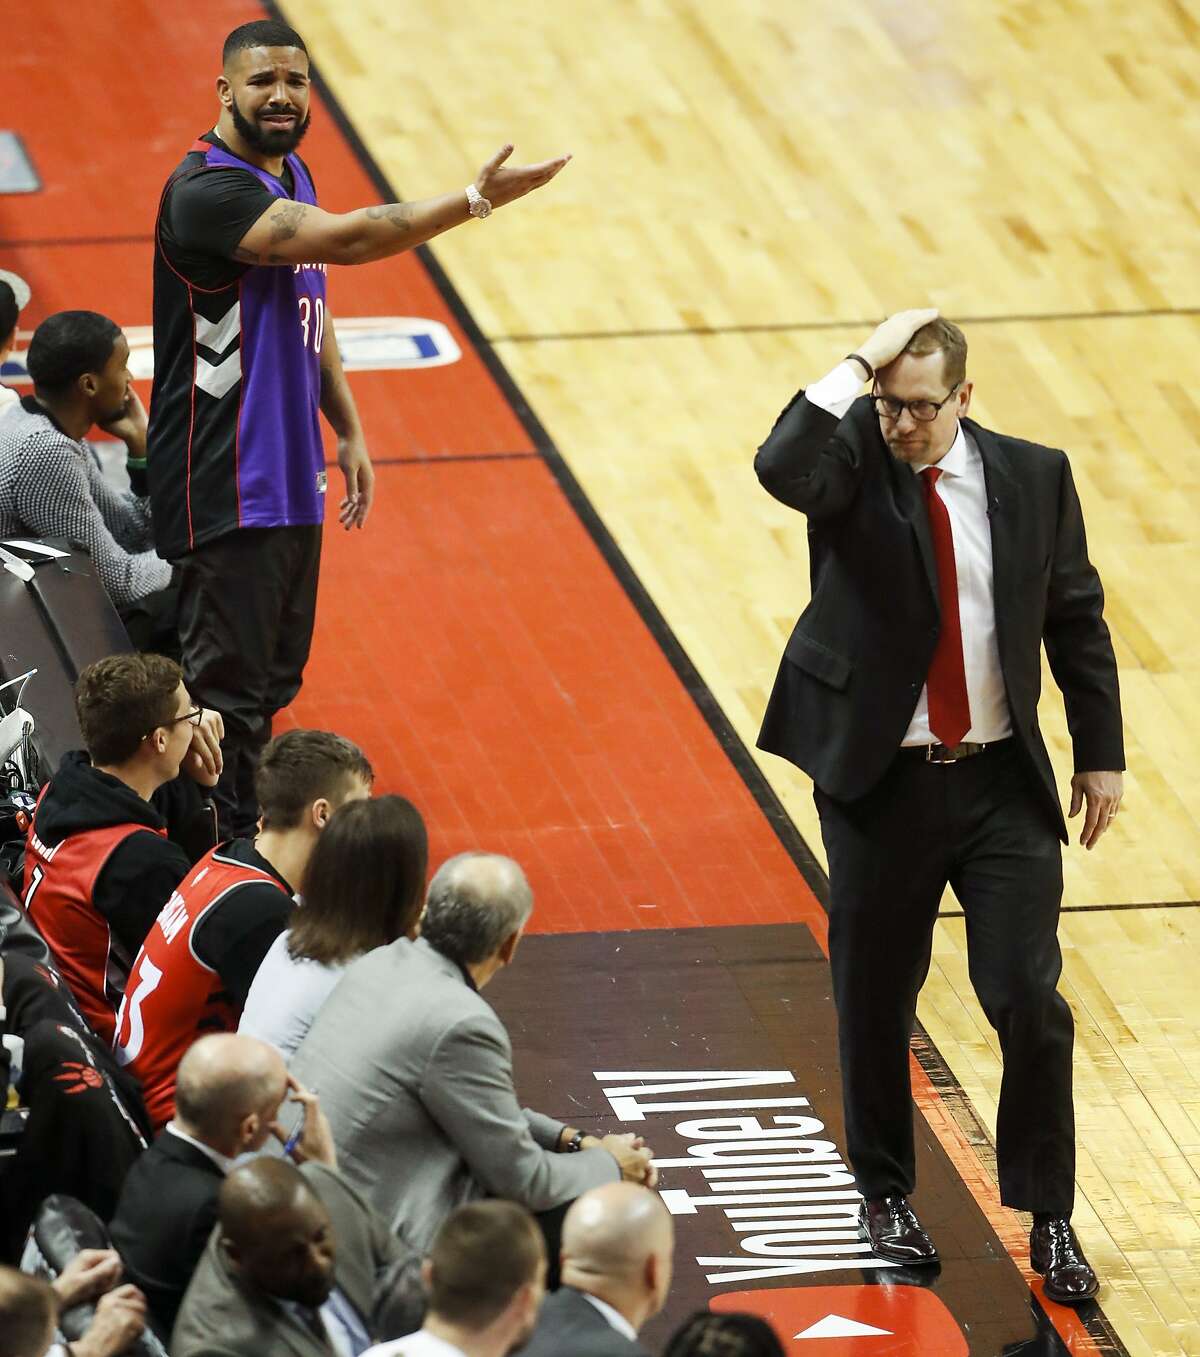 Drake and Toronto Raptors’ coach Nick Nurse react in the second quarter during game 1 of the NBA Finals between the Golden State Warriors and the Toronto Raptors at Scotiabank Arena on Thursday, May 30, 2019 in Toronto, Ontario, Canada.